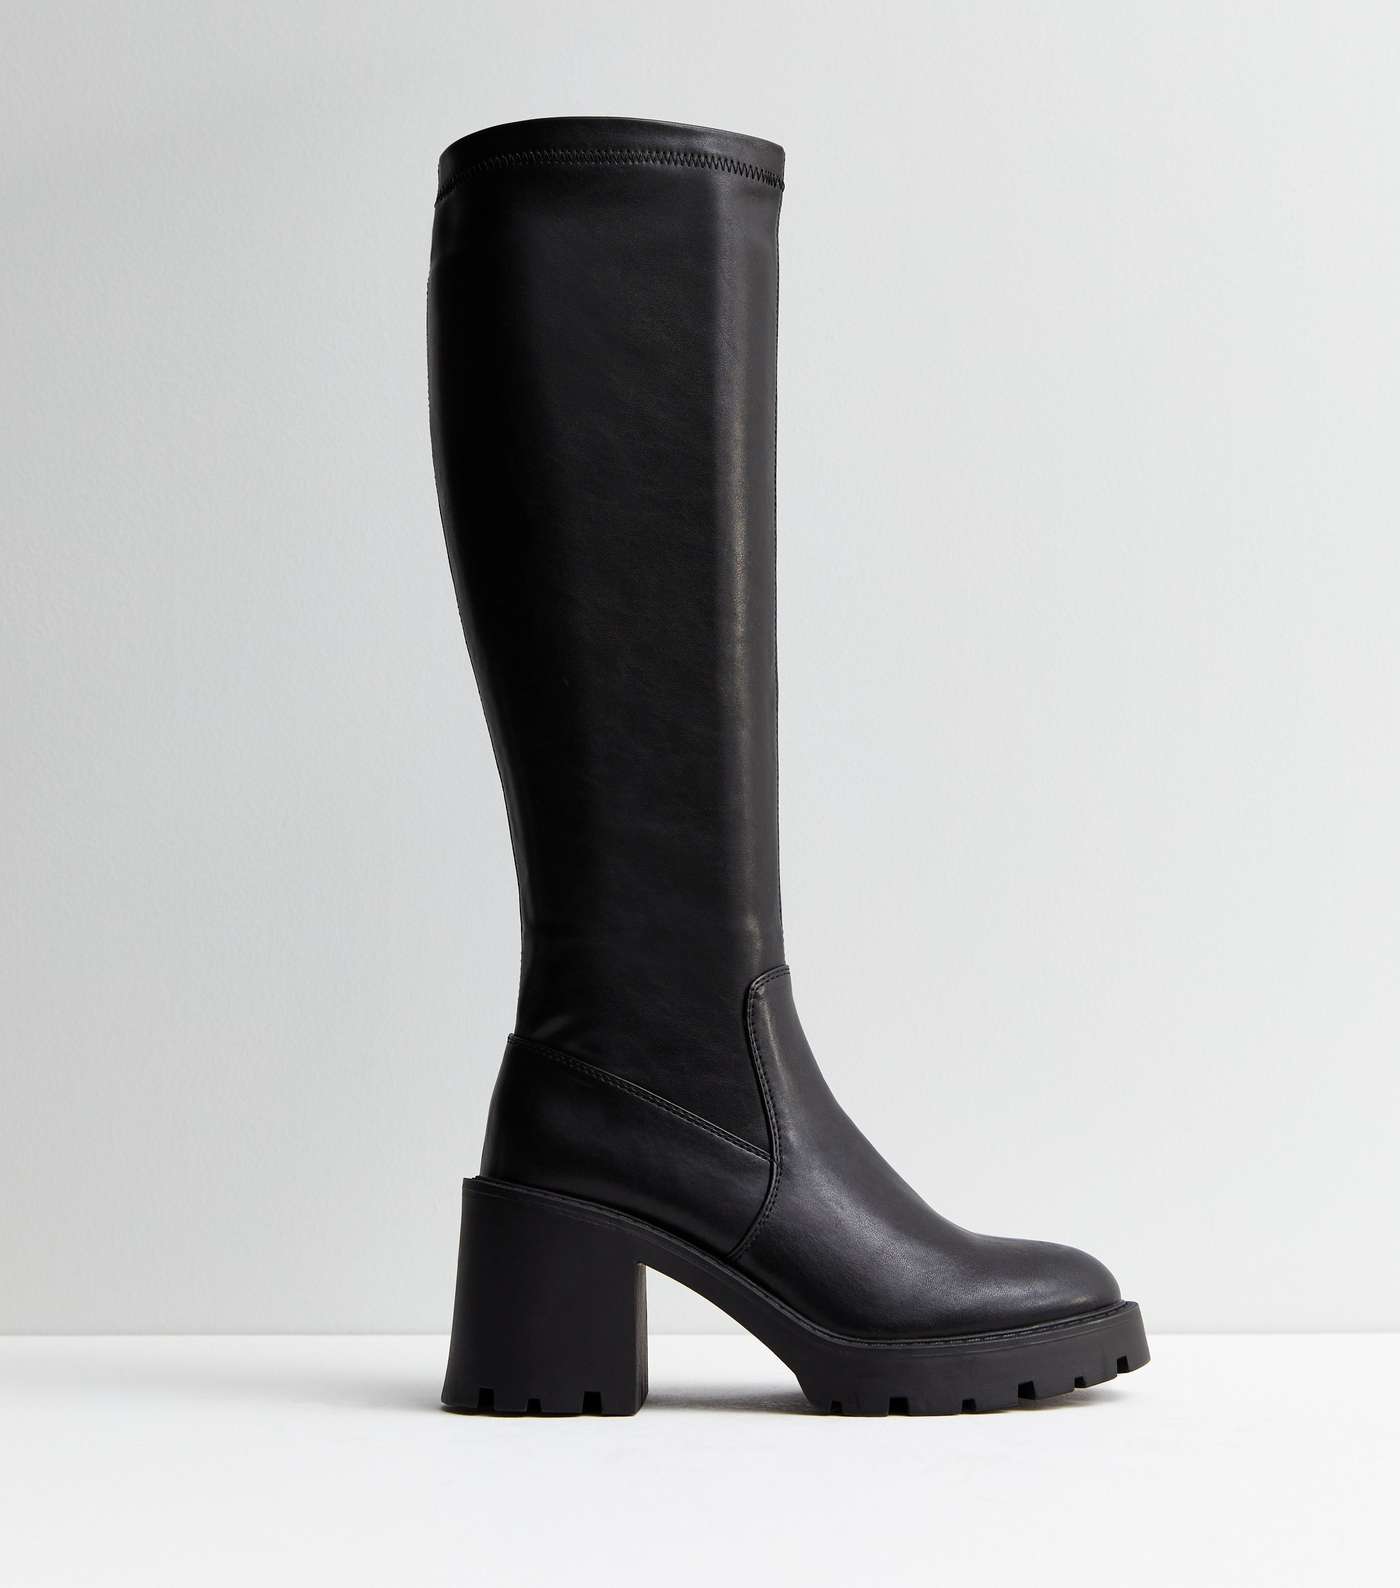 Black Leather-Look Stretch Block Heel Knee High Boots Image 3